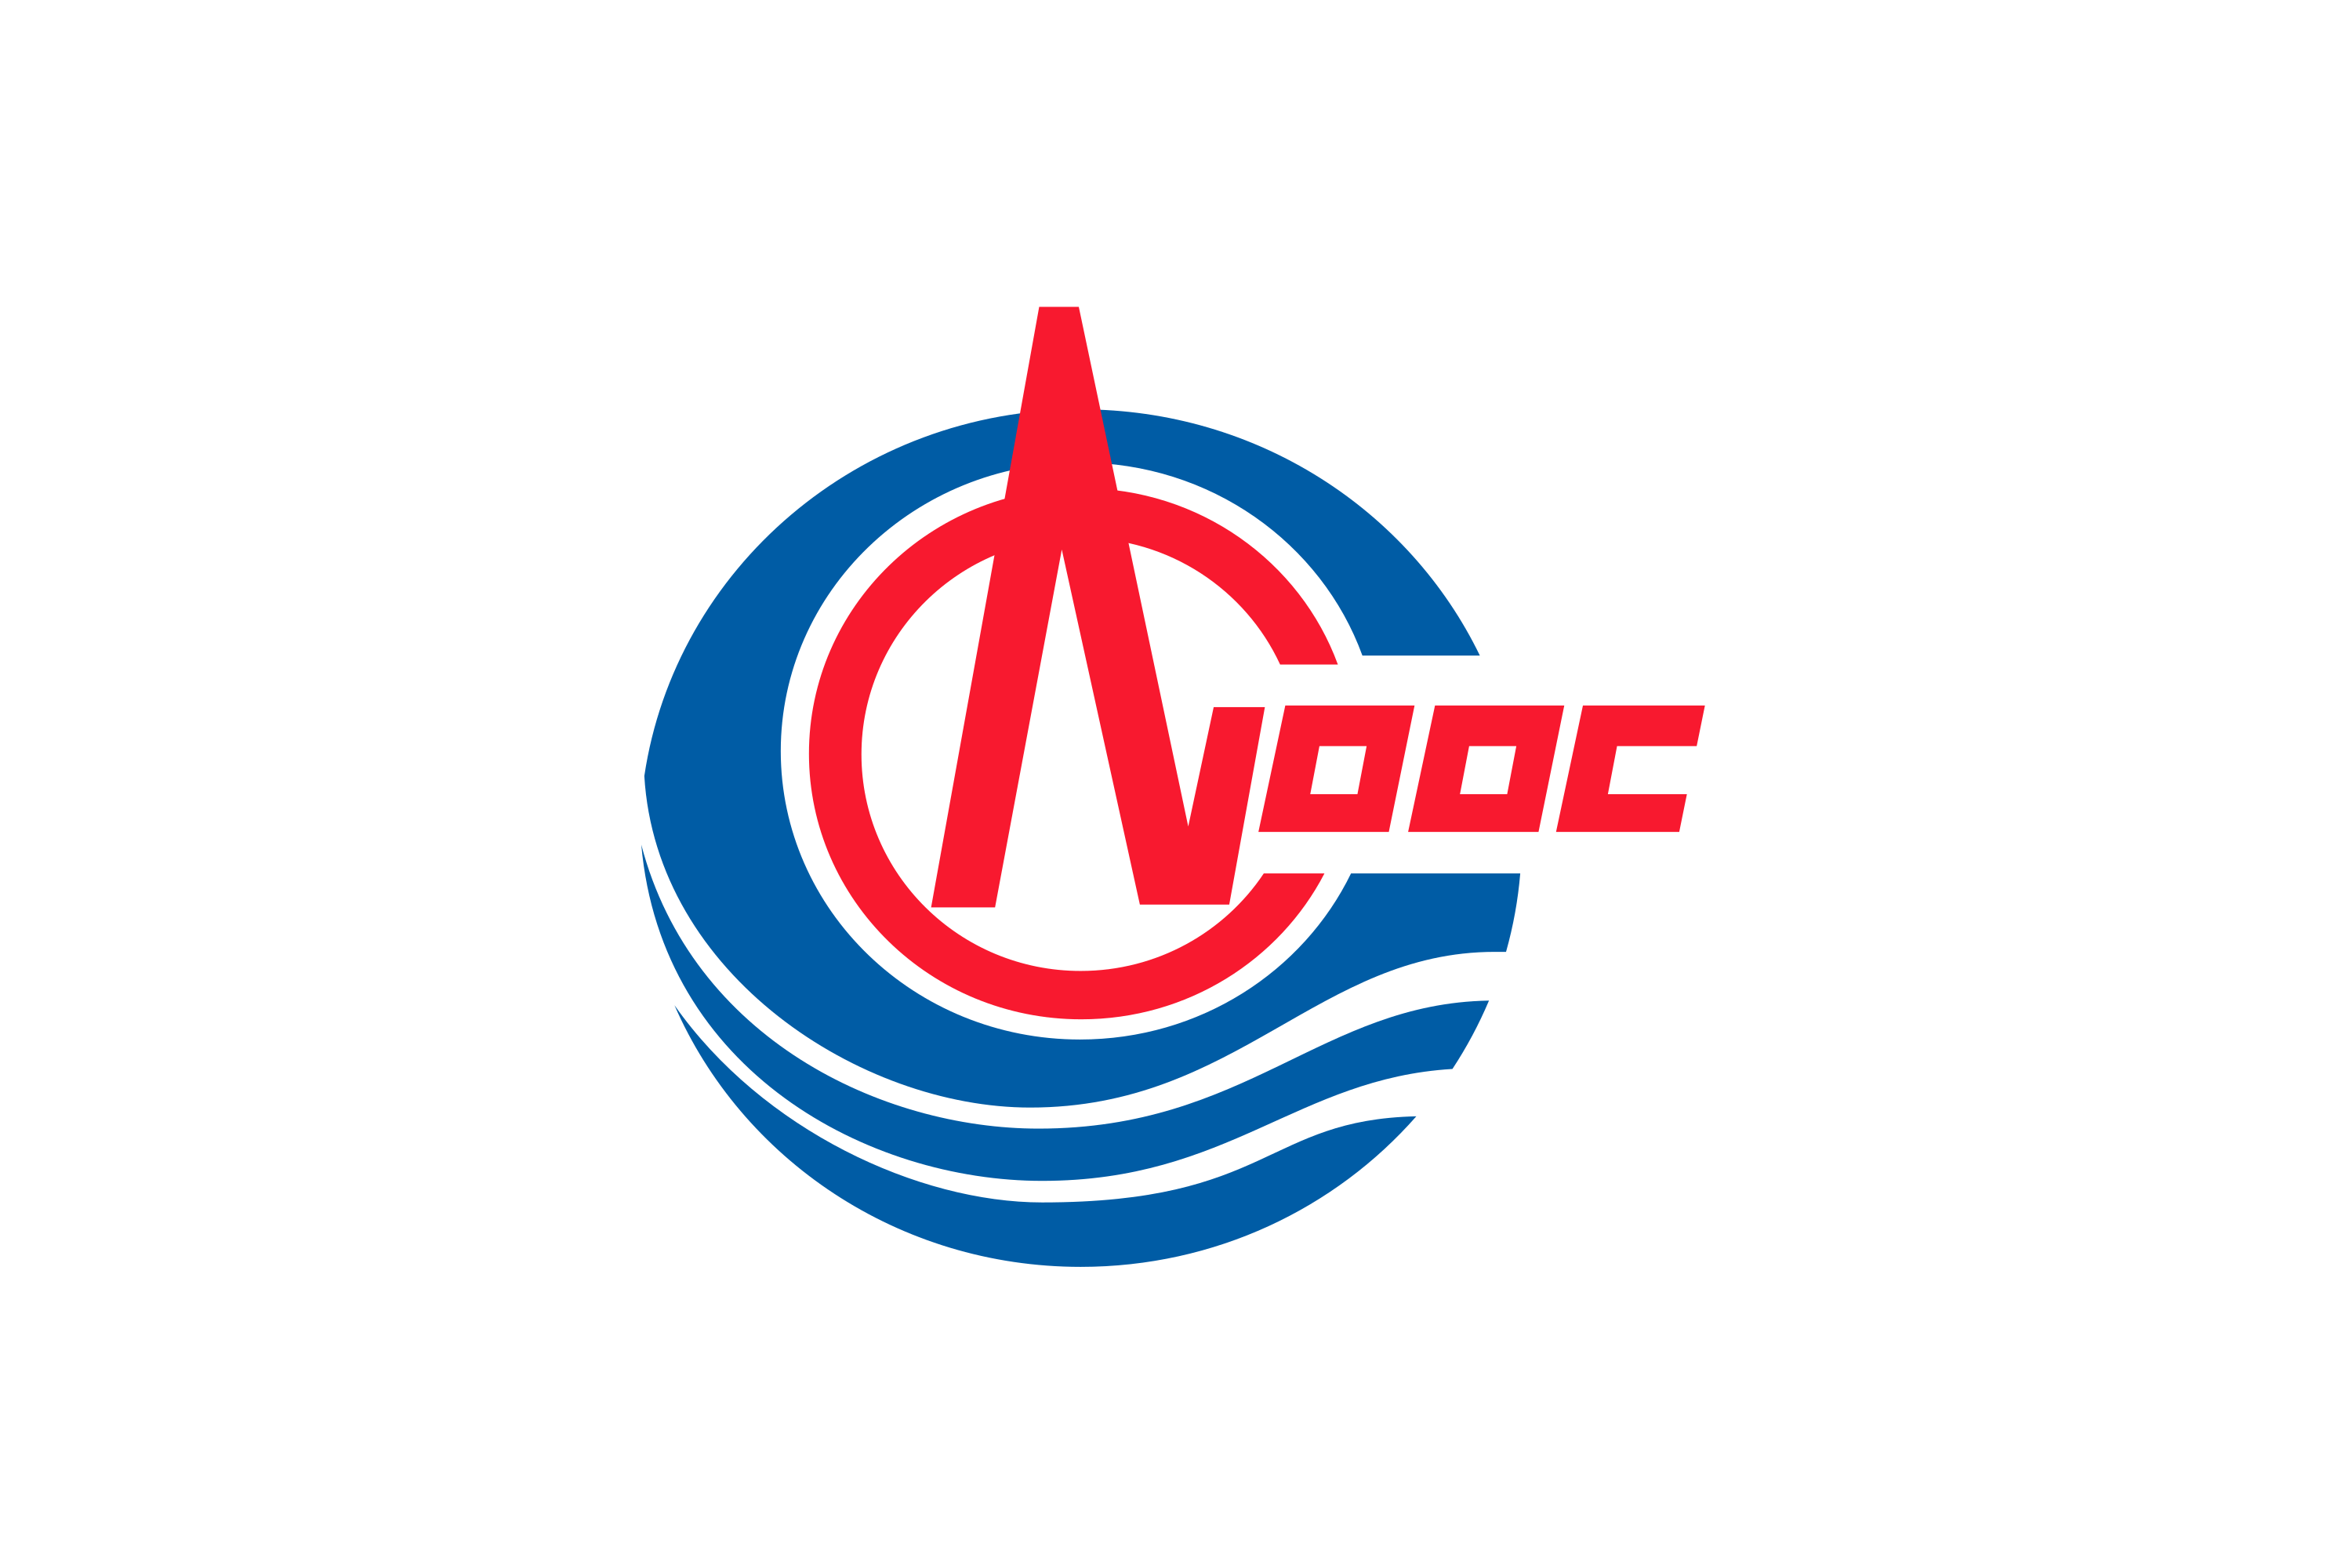 Download China National Offshore Oil Corporation (CNOOC Group) Logo in